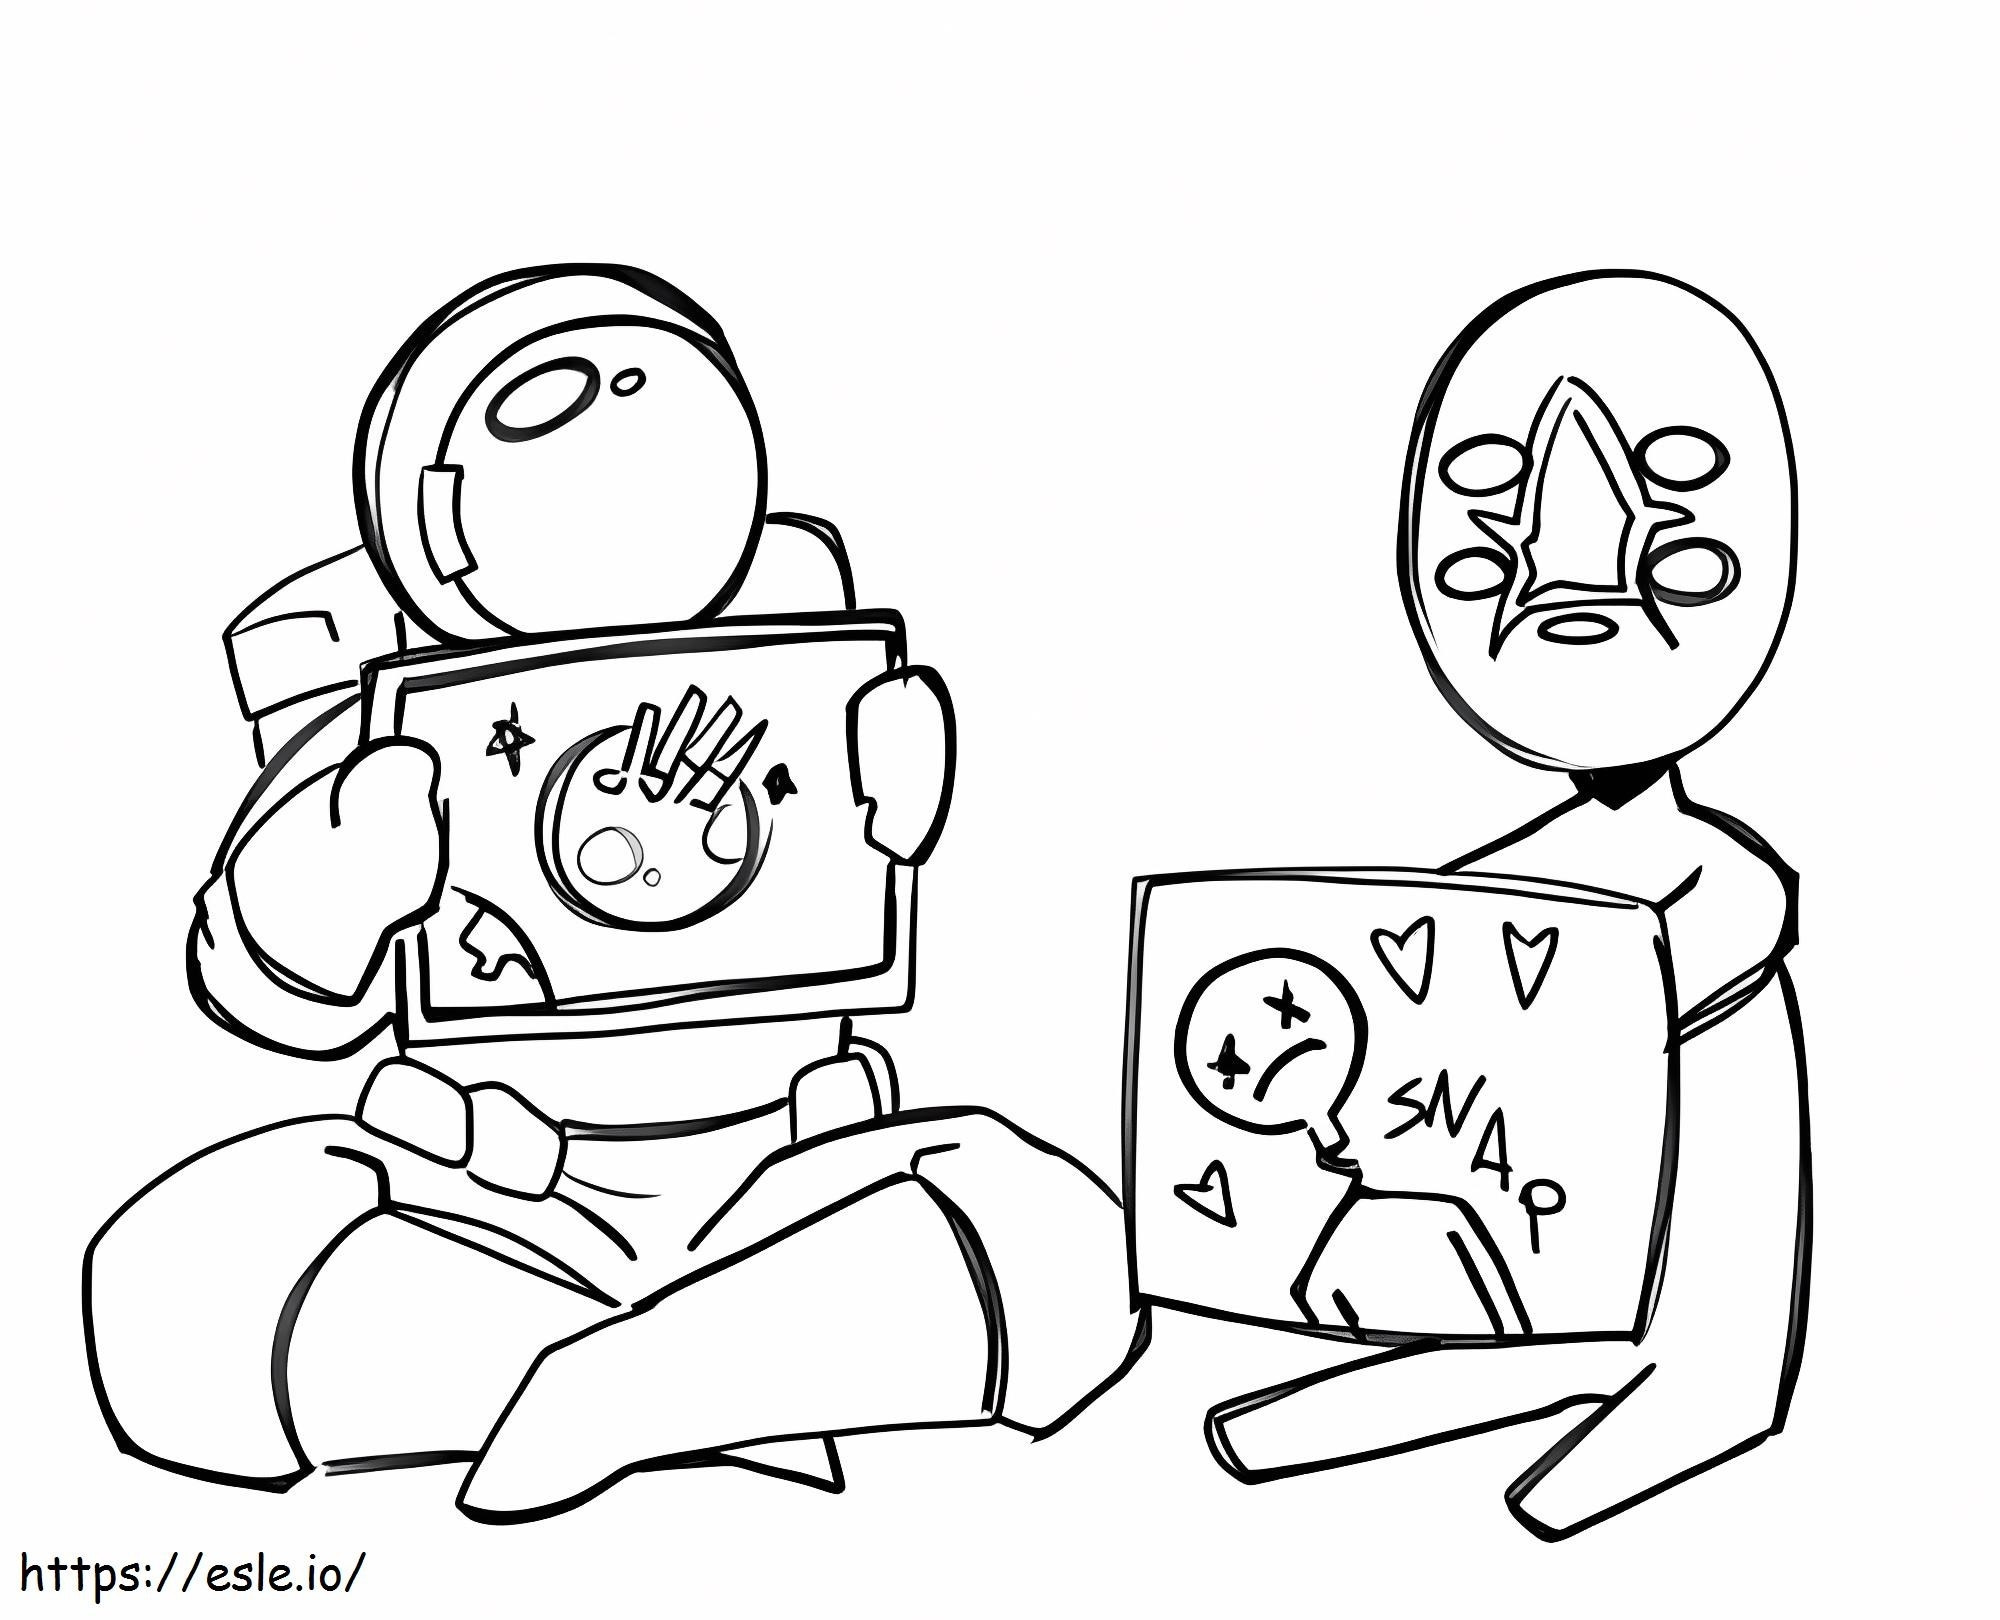 Scp 173 With Among Us coloring page